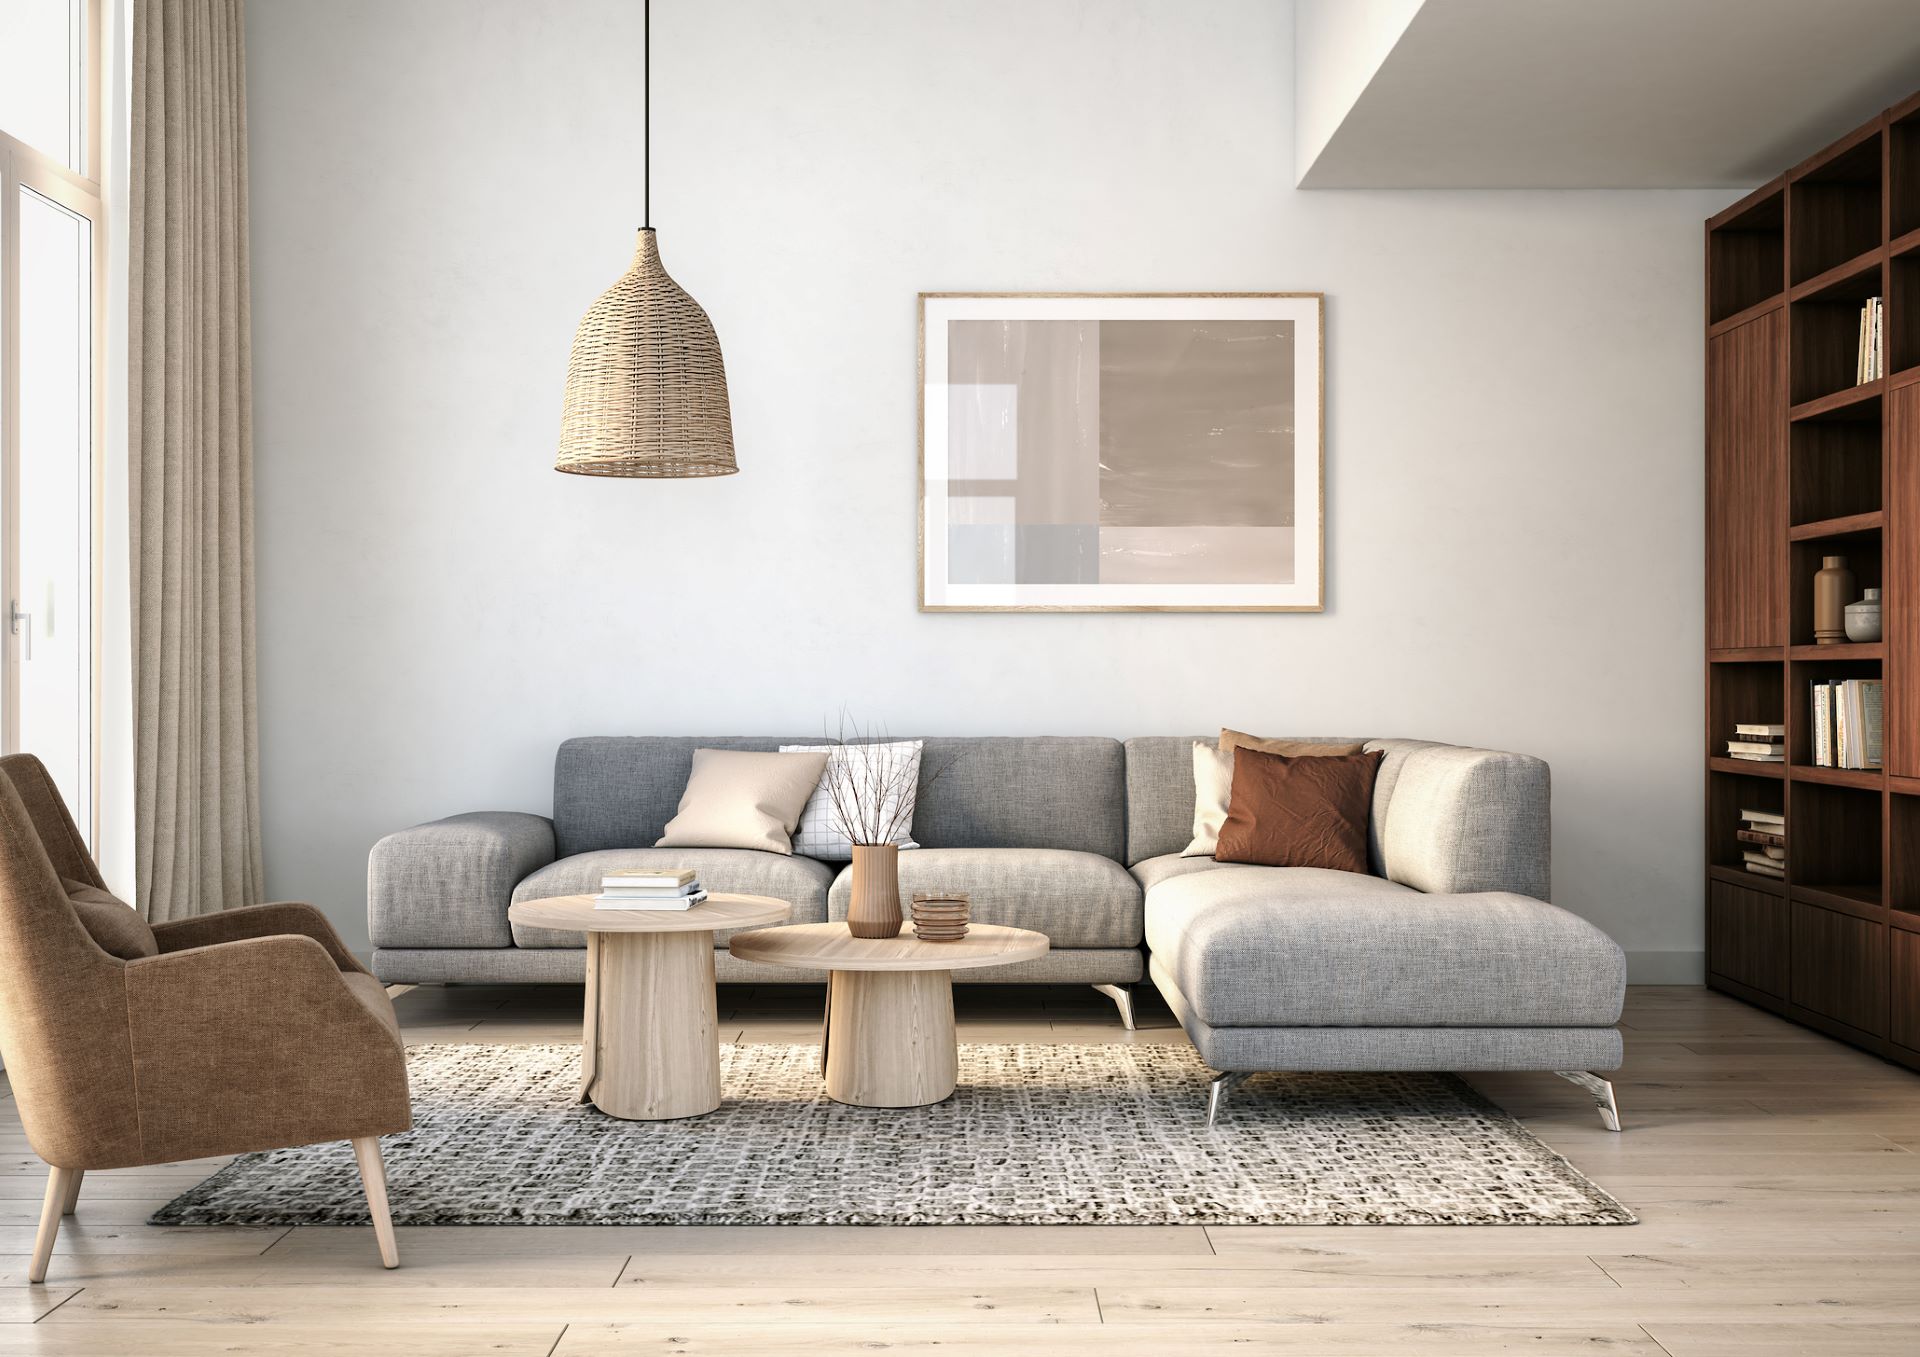 Furniture For A Scandinavian inspired Home